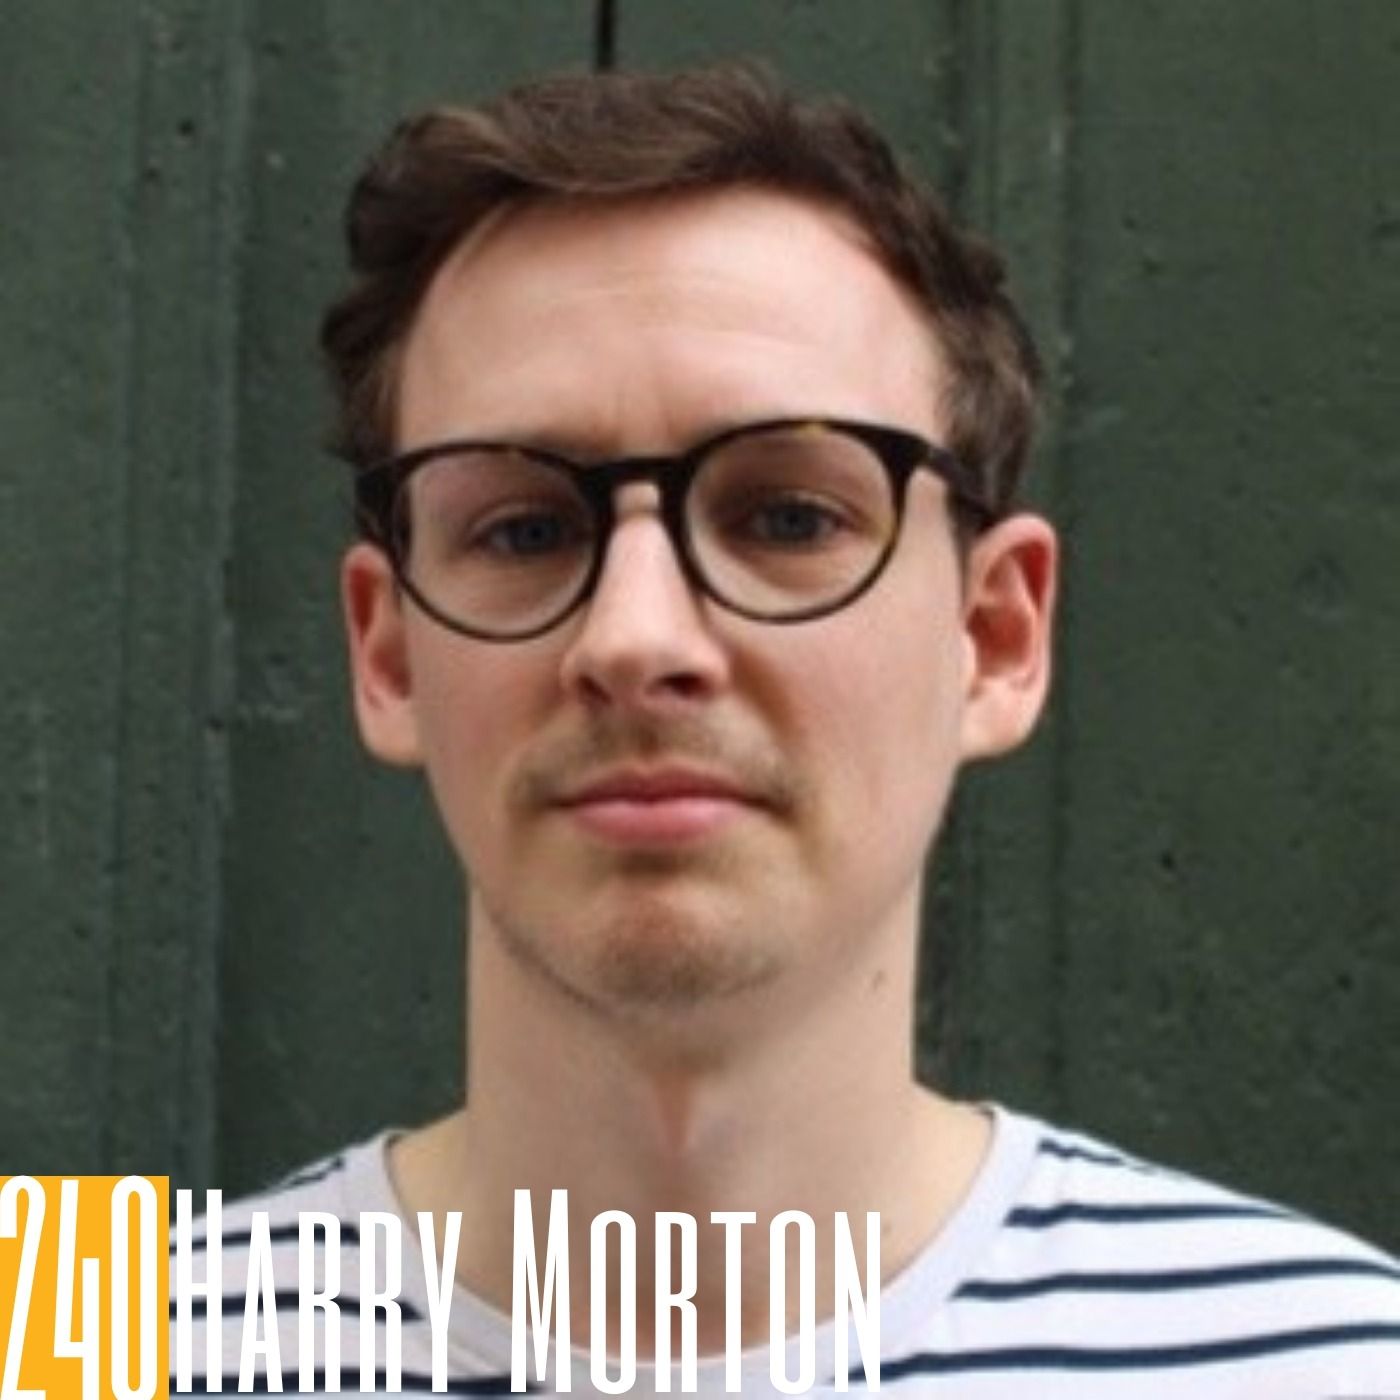 240 Harry Morton - Just Go Out And Do It: The Rallying Cry of the Entrepreneur